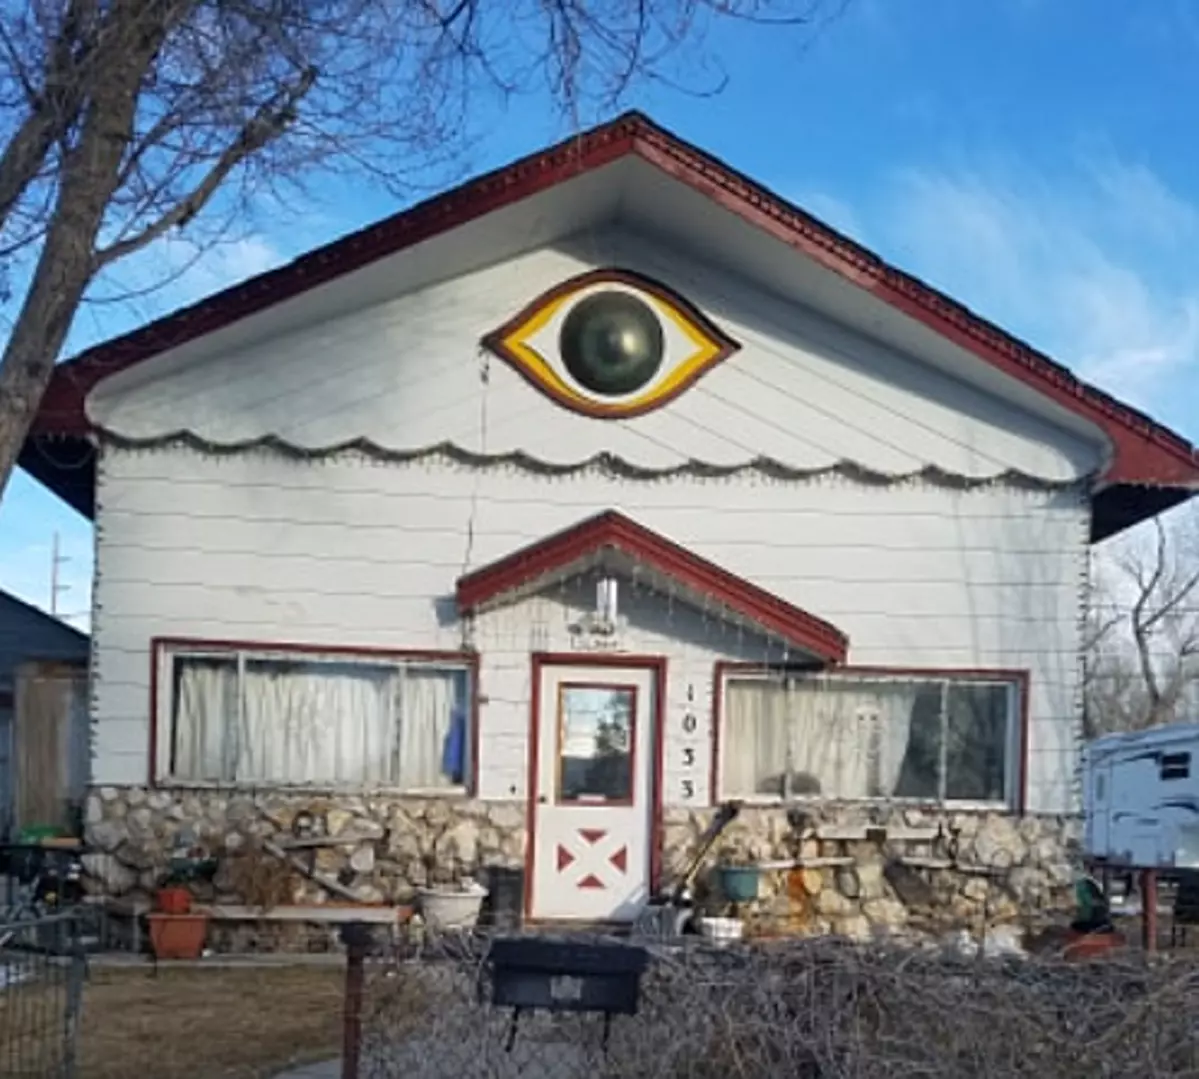 Have You Seen The 'All Seeing Eye' House In Casper? [PHOTOS]